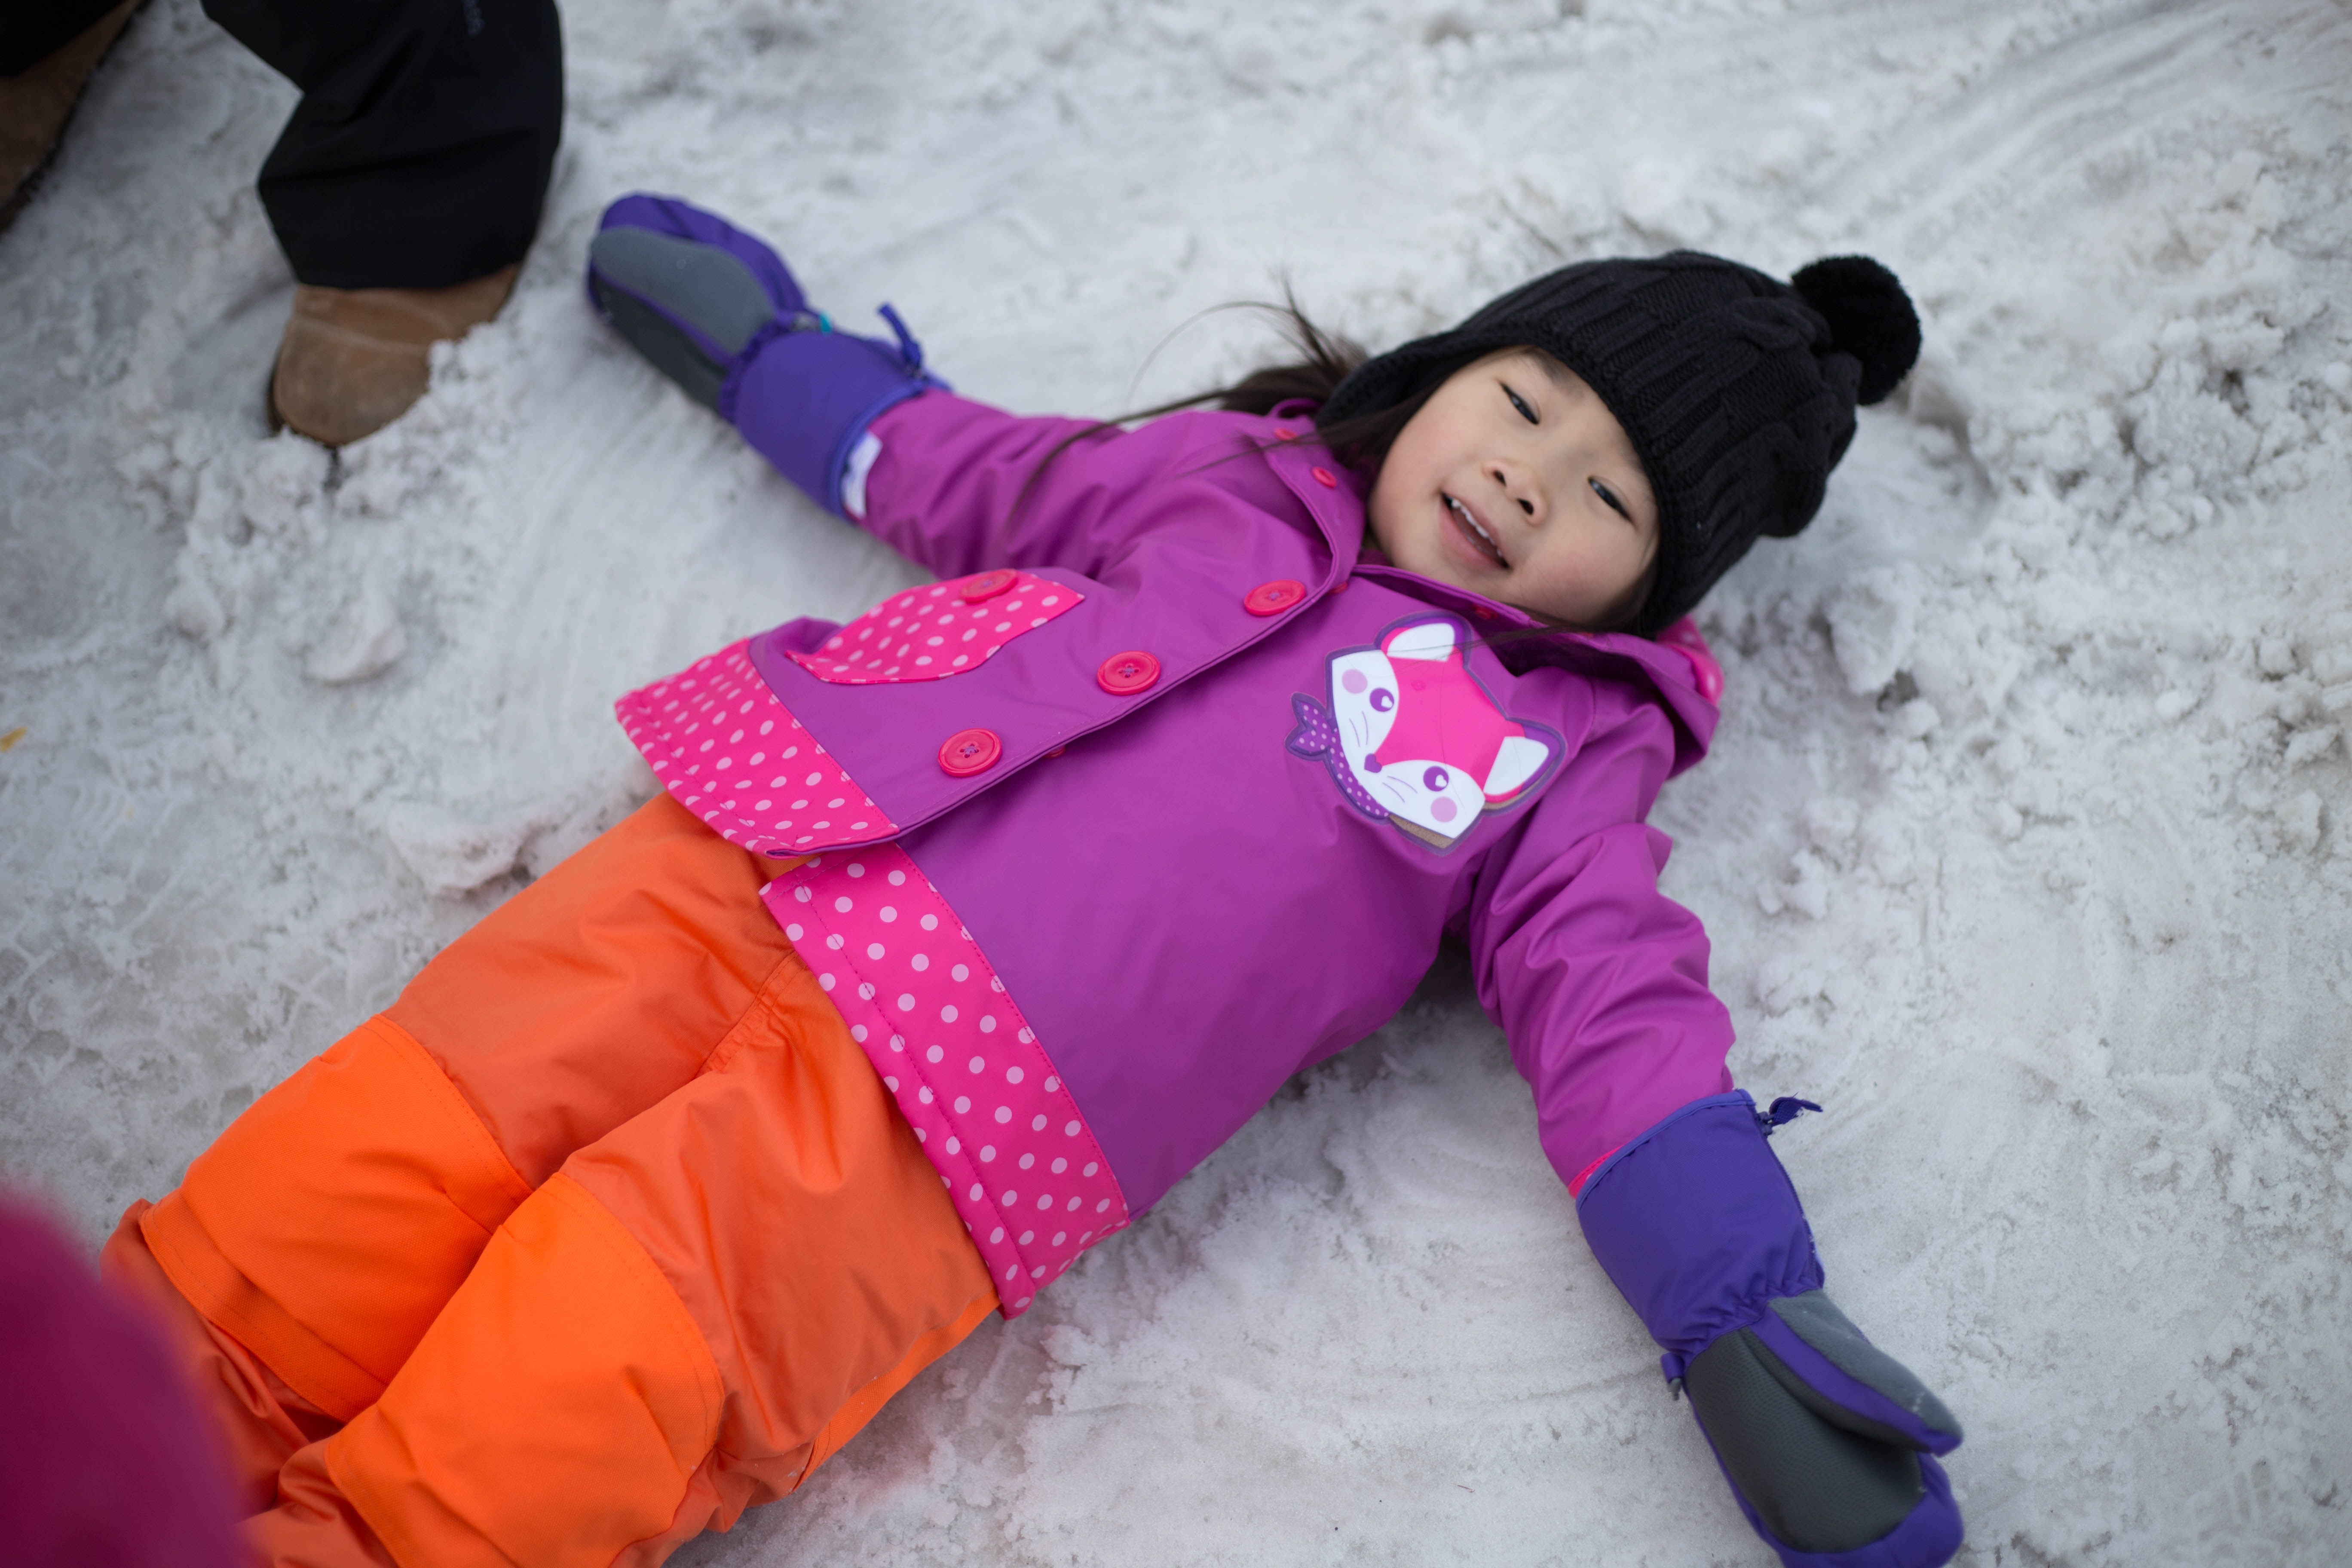 I tried to make snow angels, but the snow was too hard!